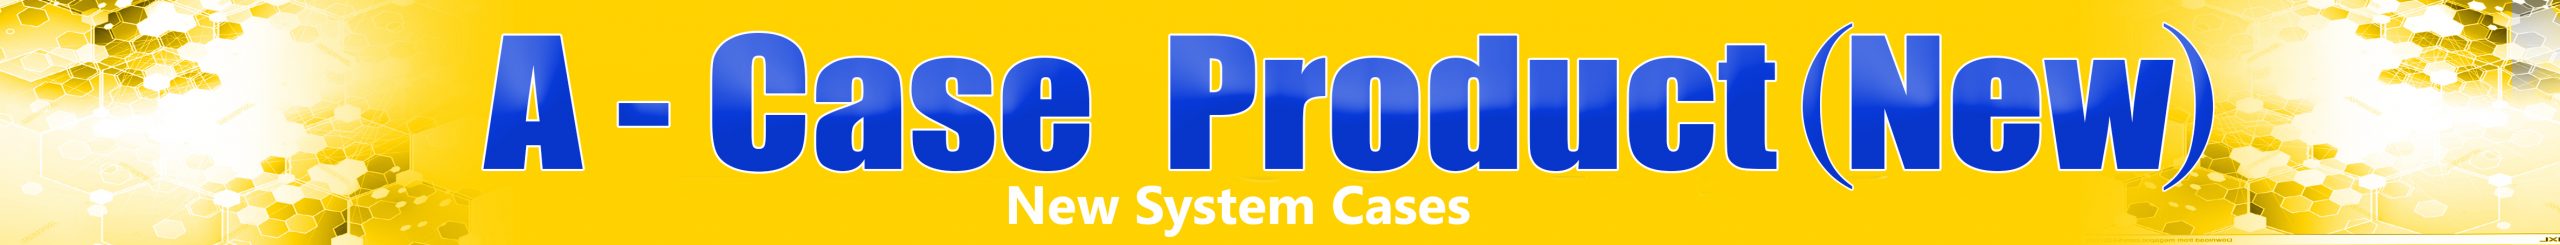 Low Profile System Cases (New)